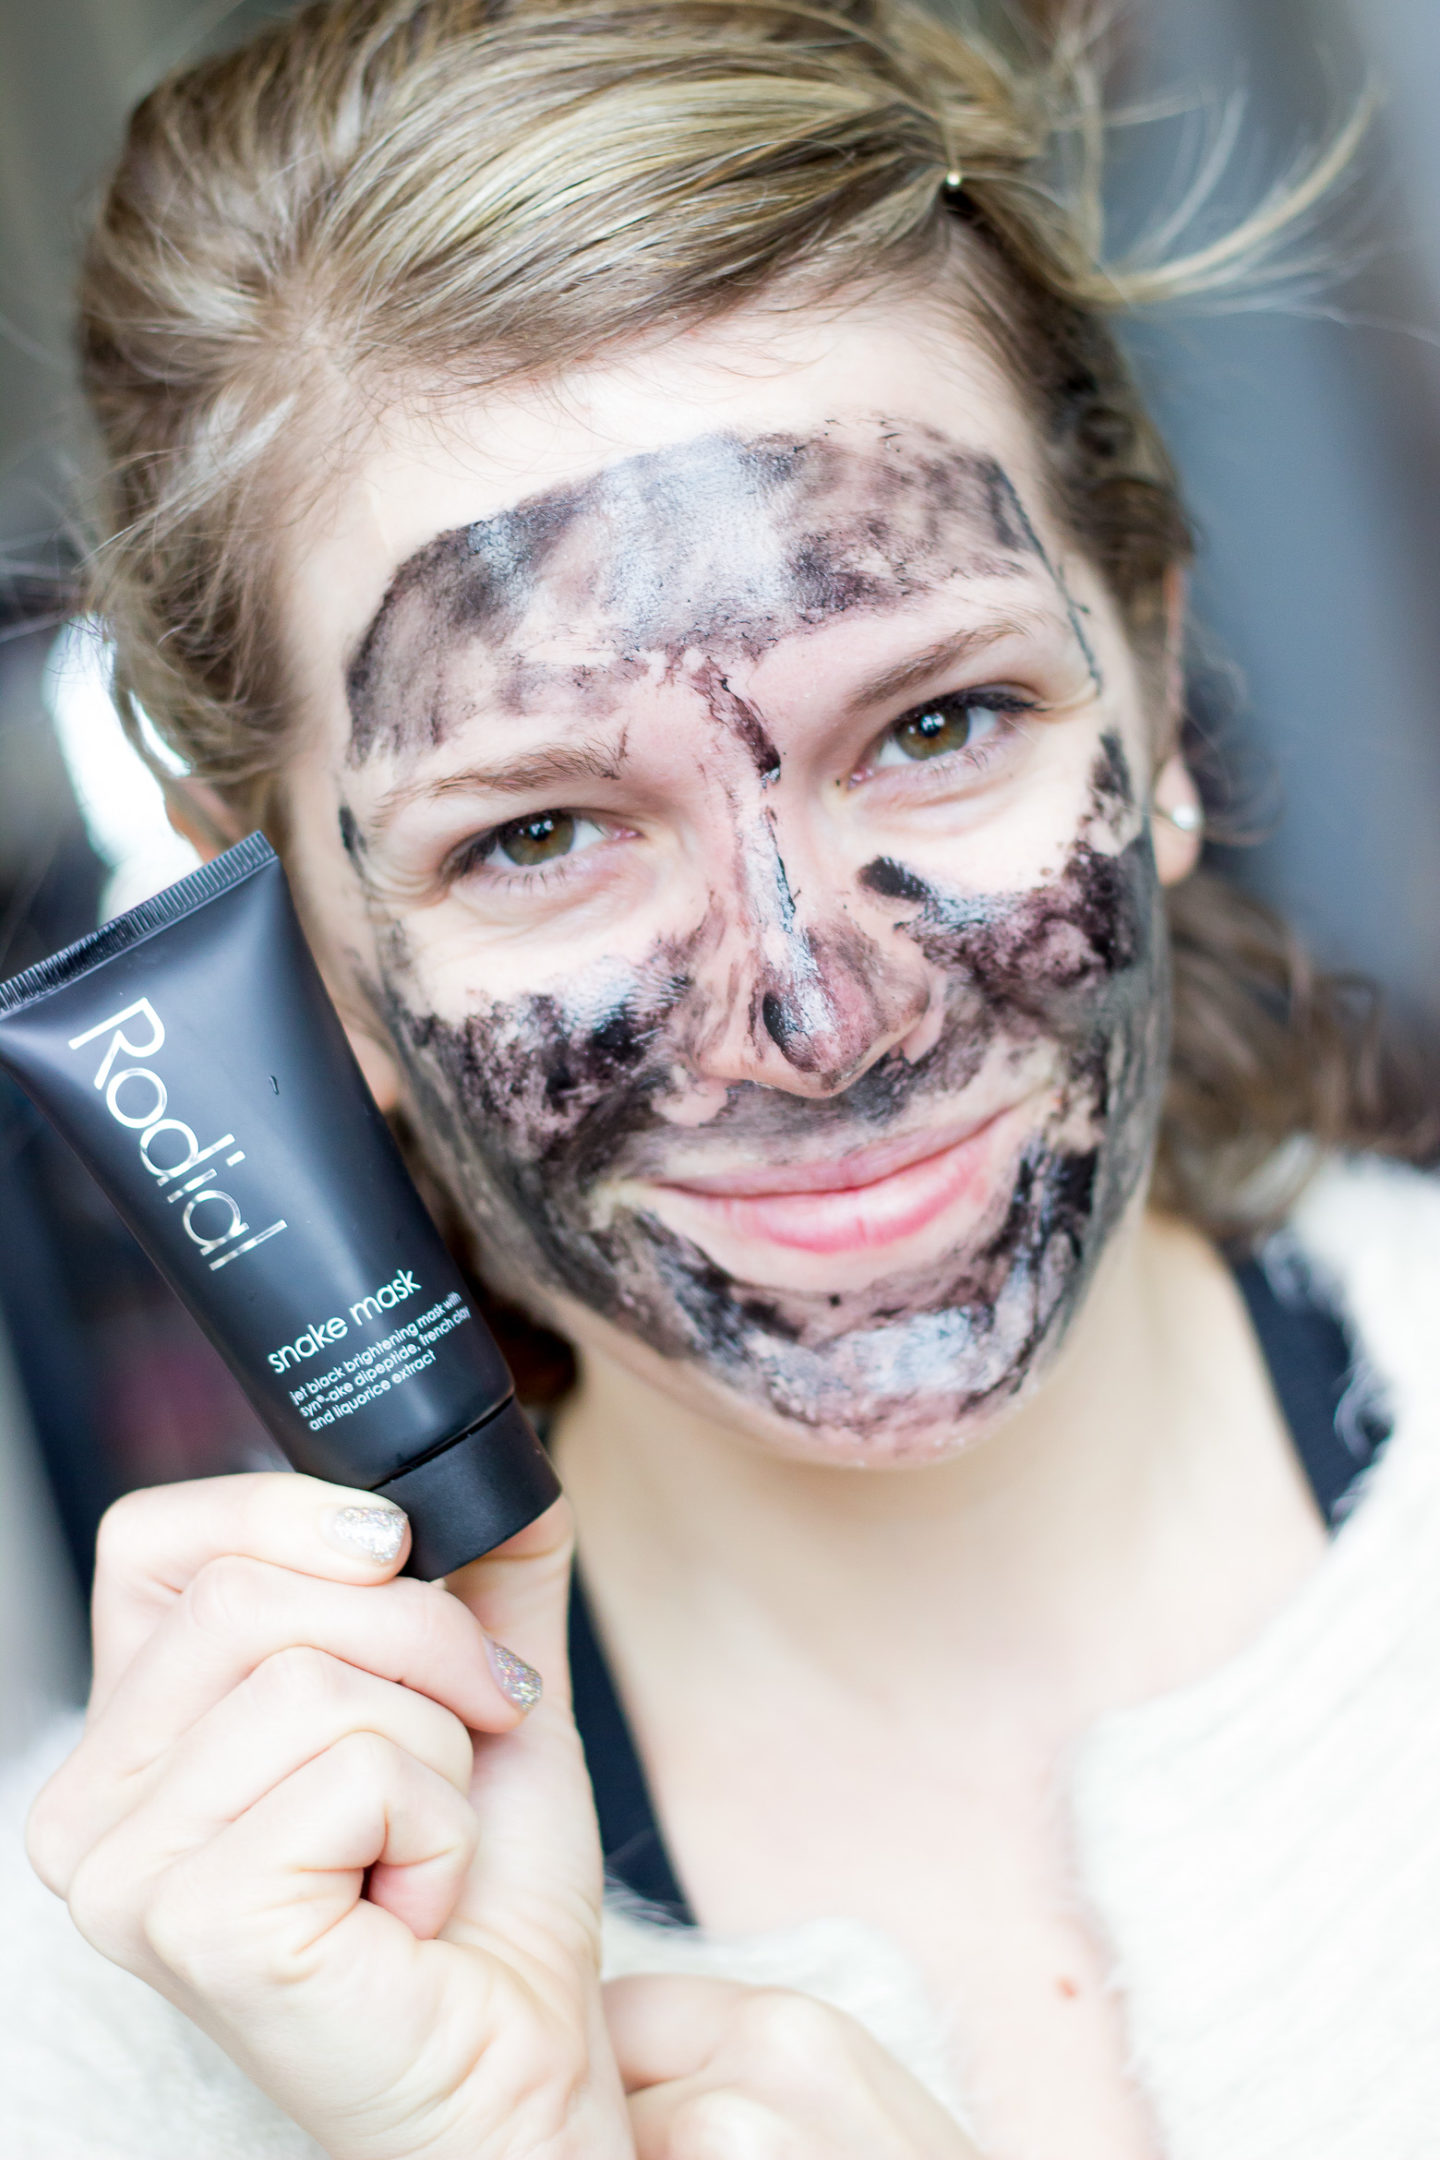 Rodial facemask on Belle Meets World blog